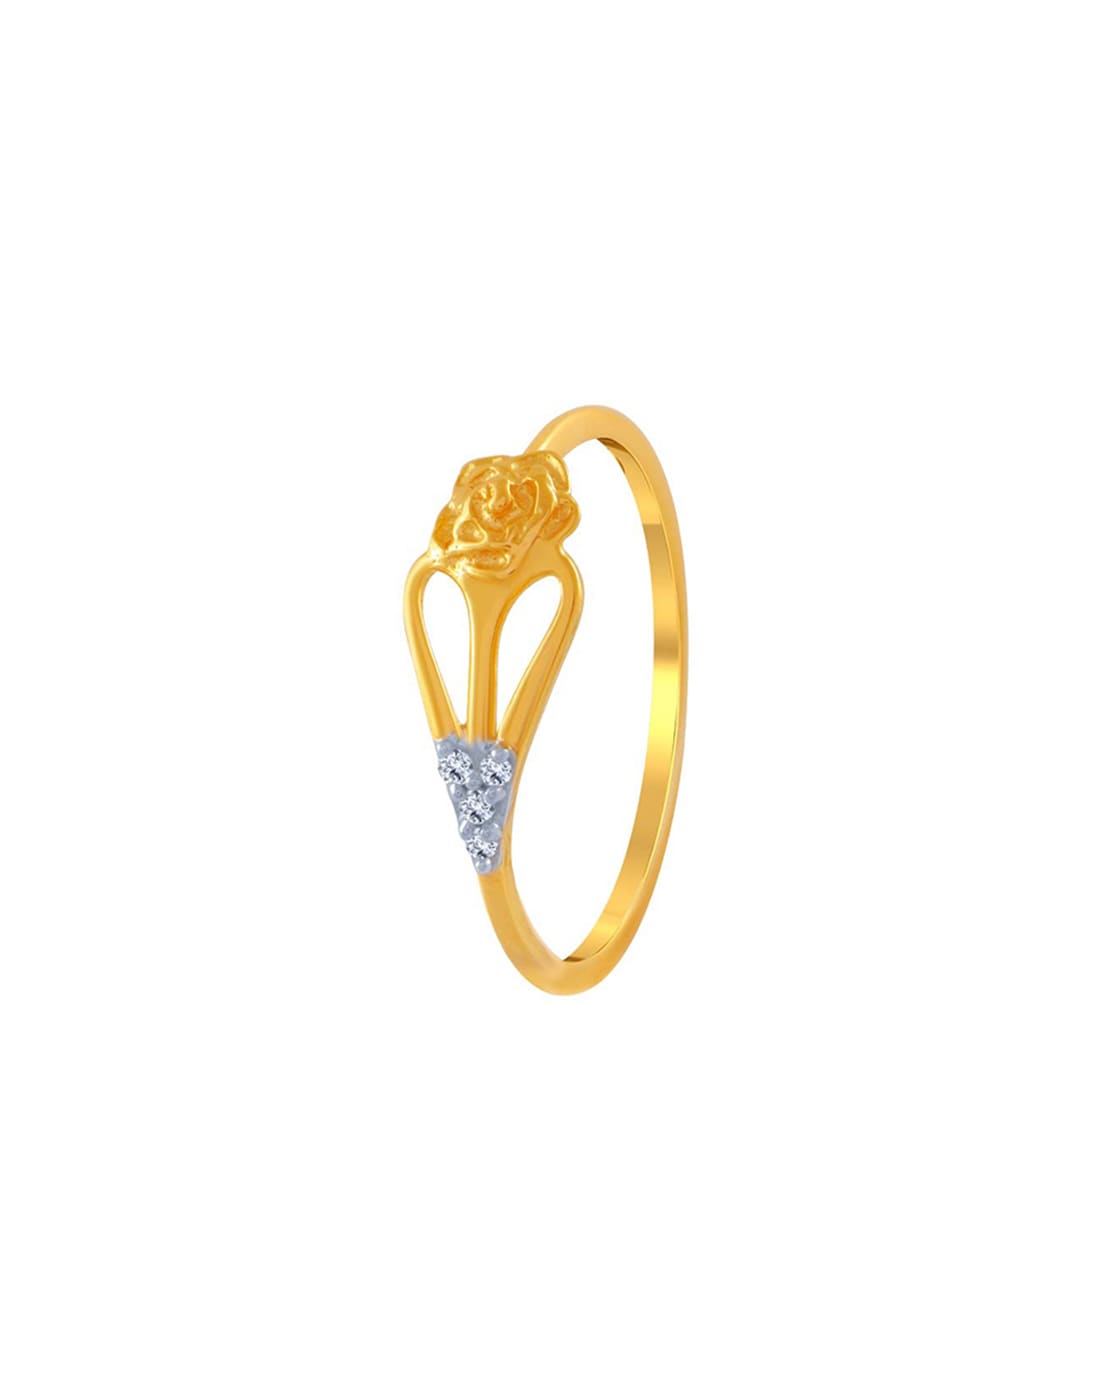 Buy Heart Rings Online in India at Best Price | PC Jeweller